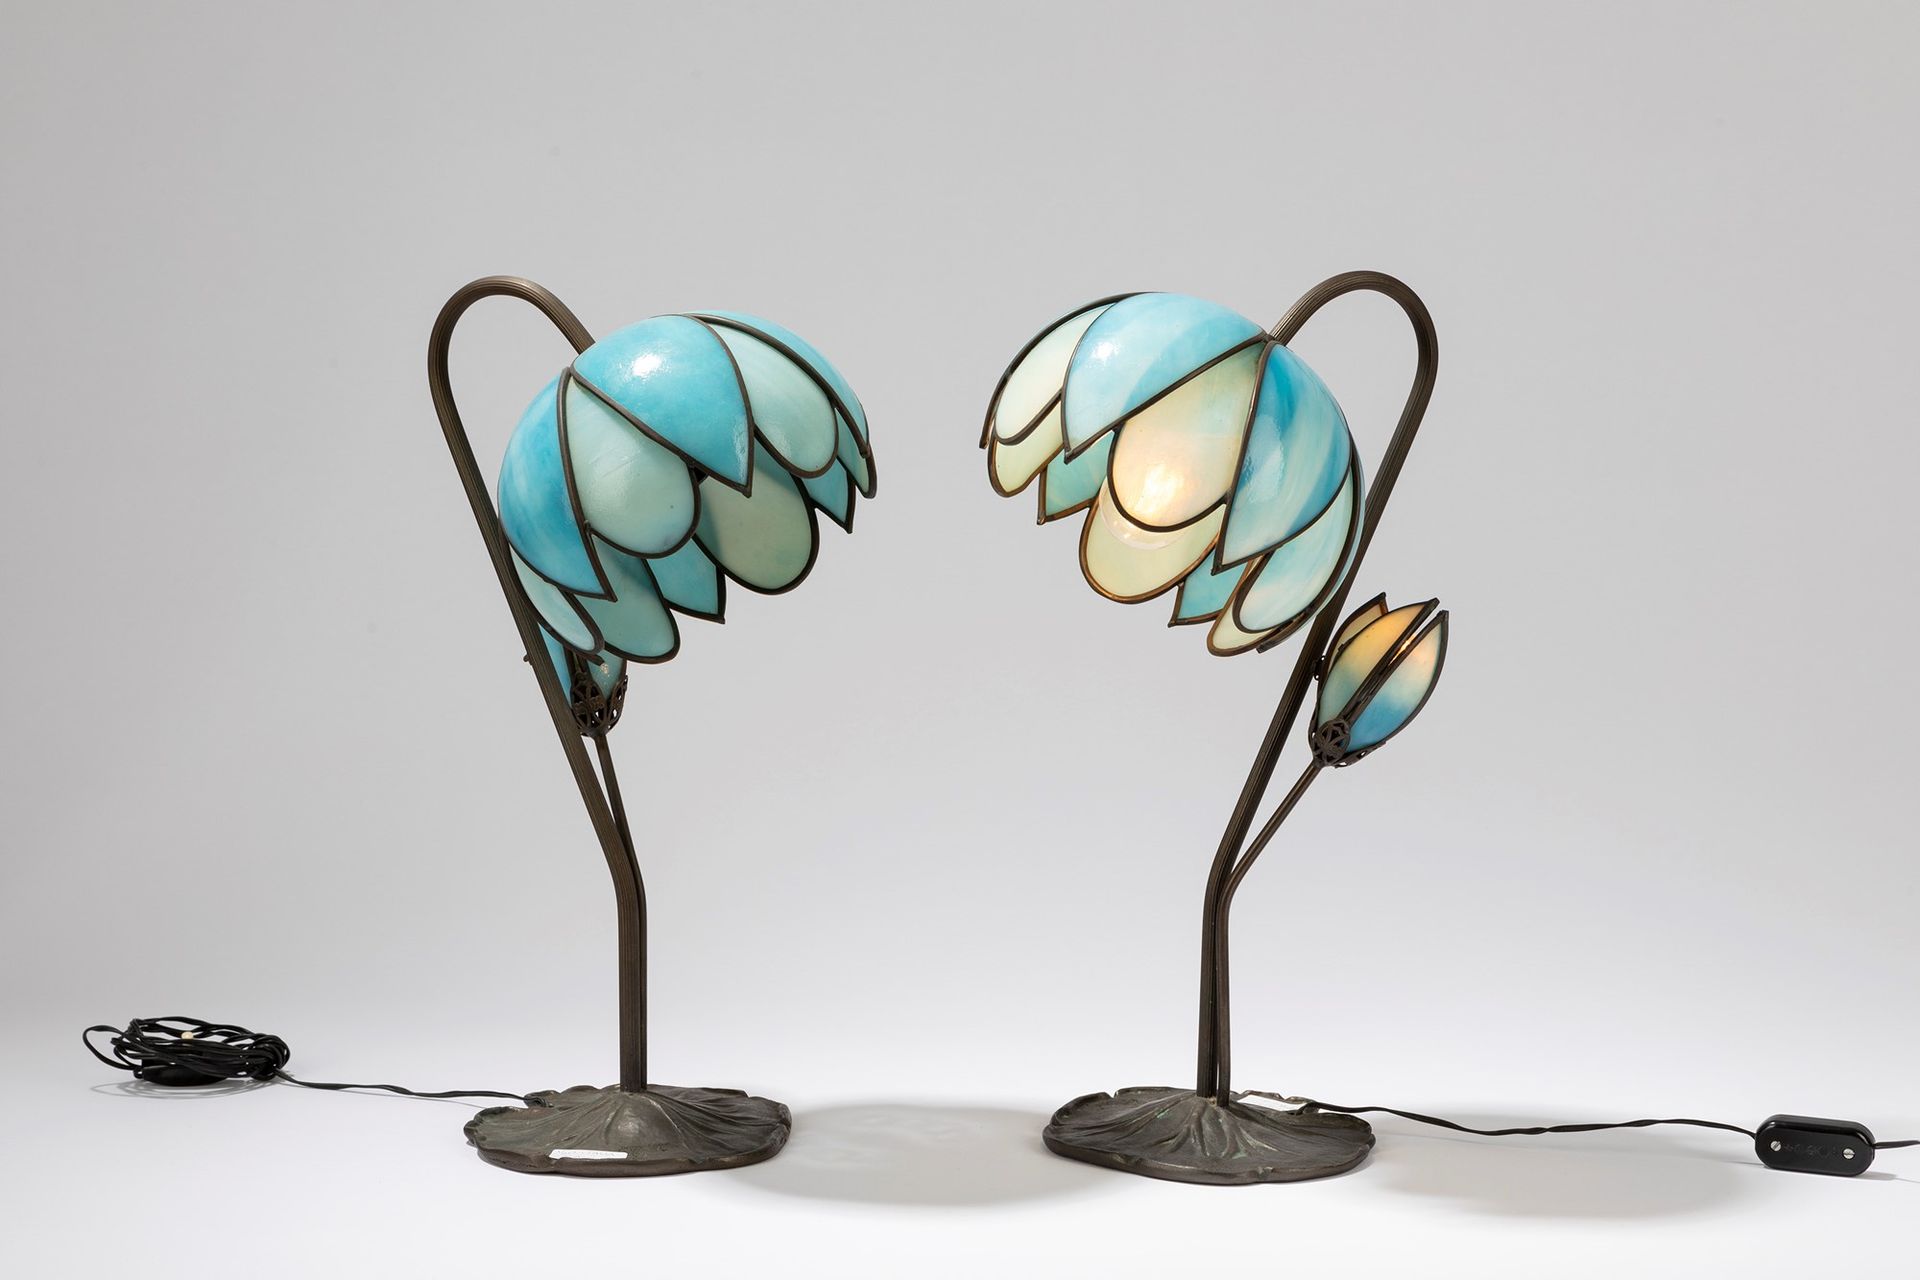 ITALIAN MANUFACTURE Pair of table lamps, 50's period

cm 41 x 16
wrought iron an&hellip;